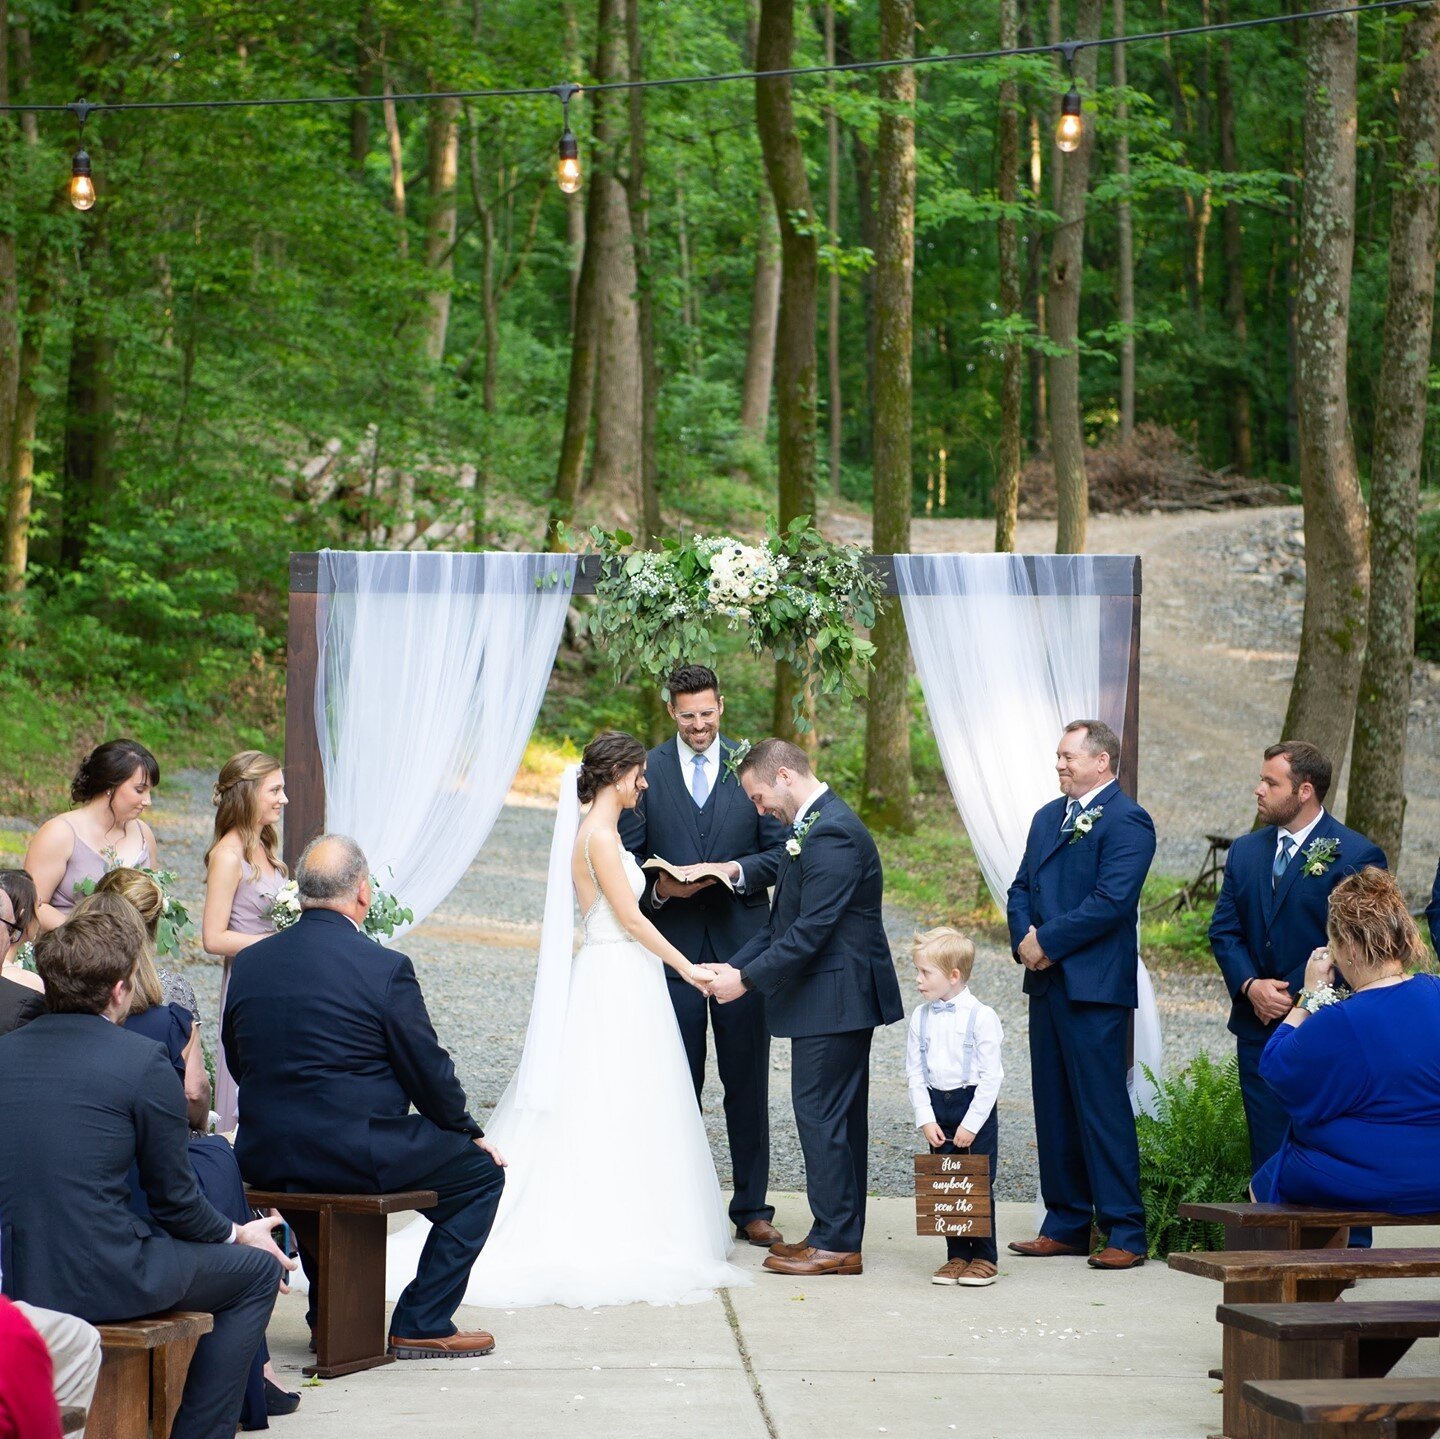 A beautiful outdoor ceremony! Caytlin &amp; Chase said &quot;I do&quot; surrounded by trees and loved ones 🥰⁠